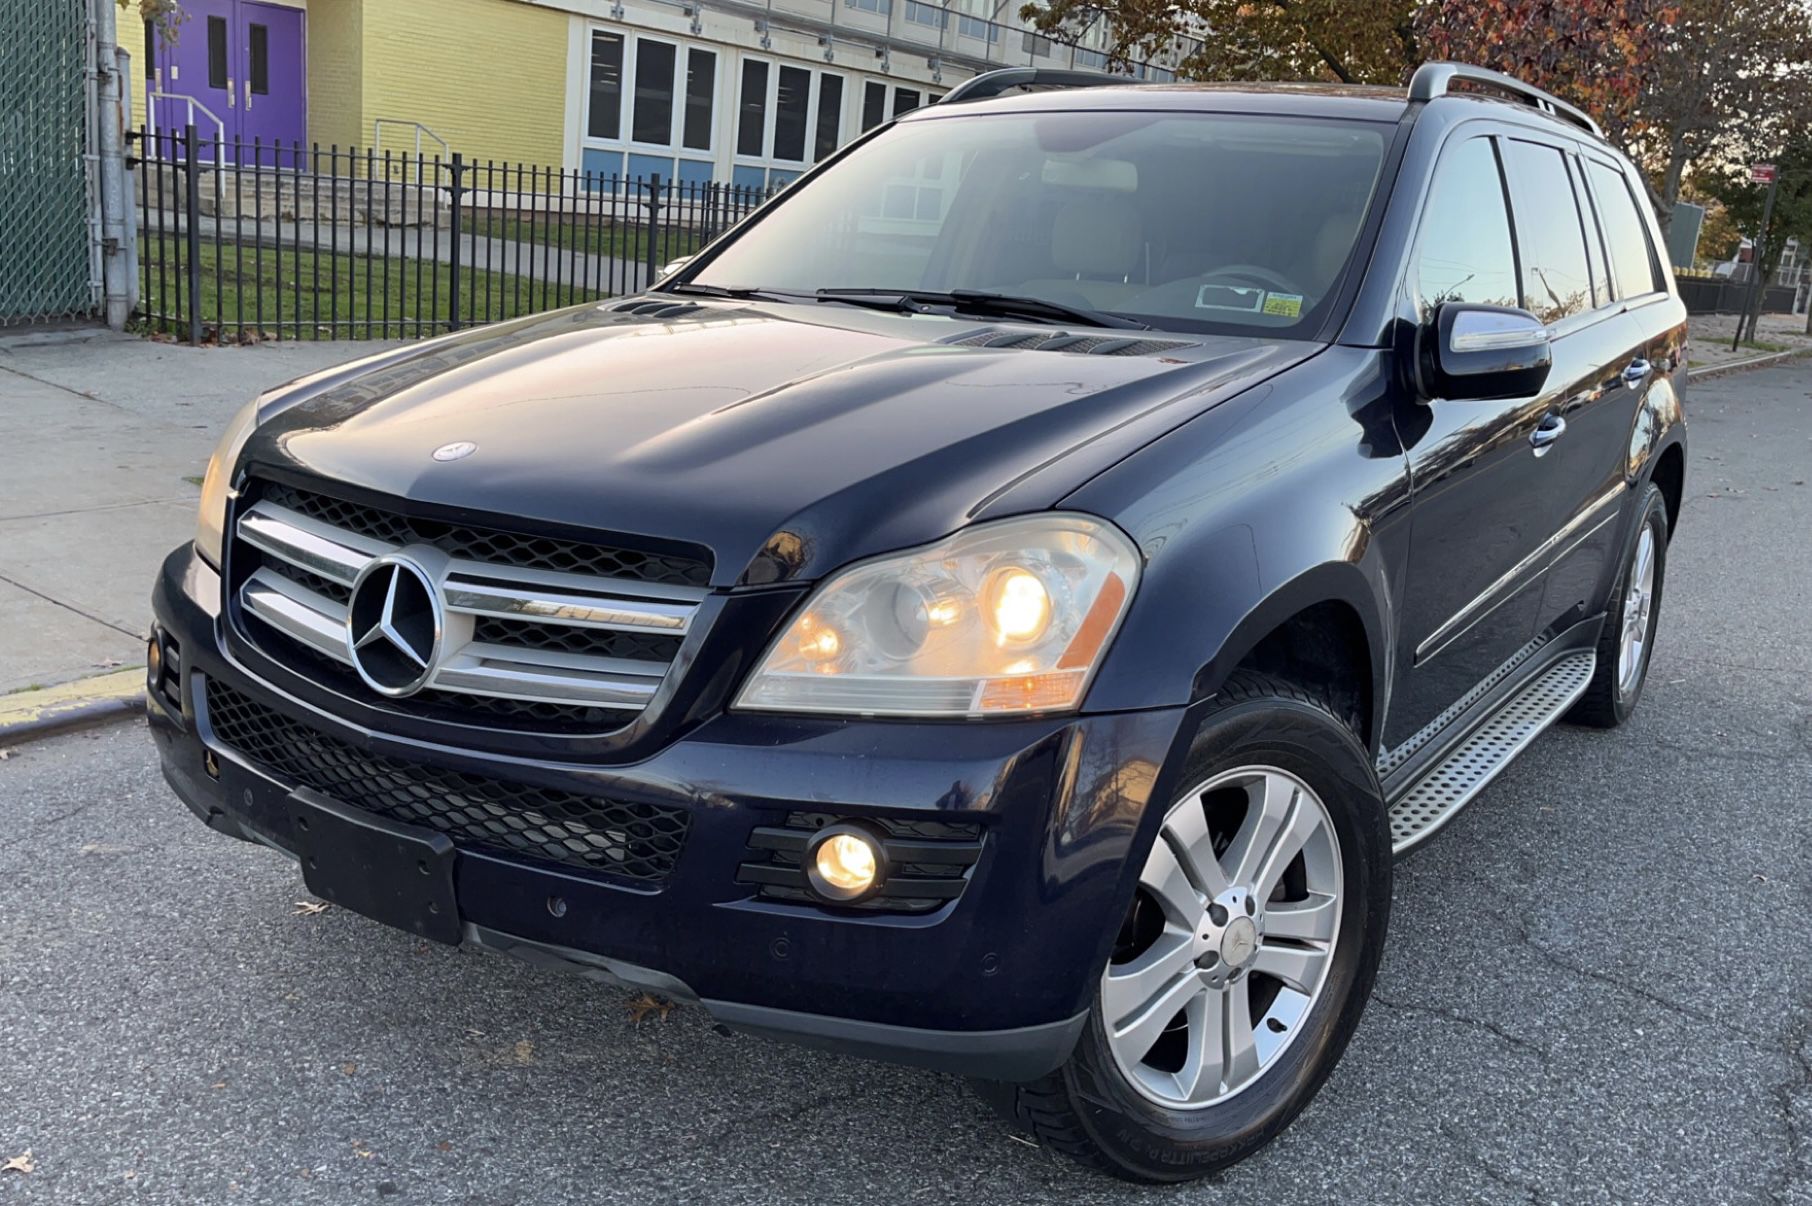 2009 Mercedes-Benz GL-Class for Sale in Staten Island, NY - OfferUp